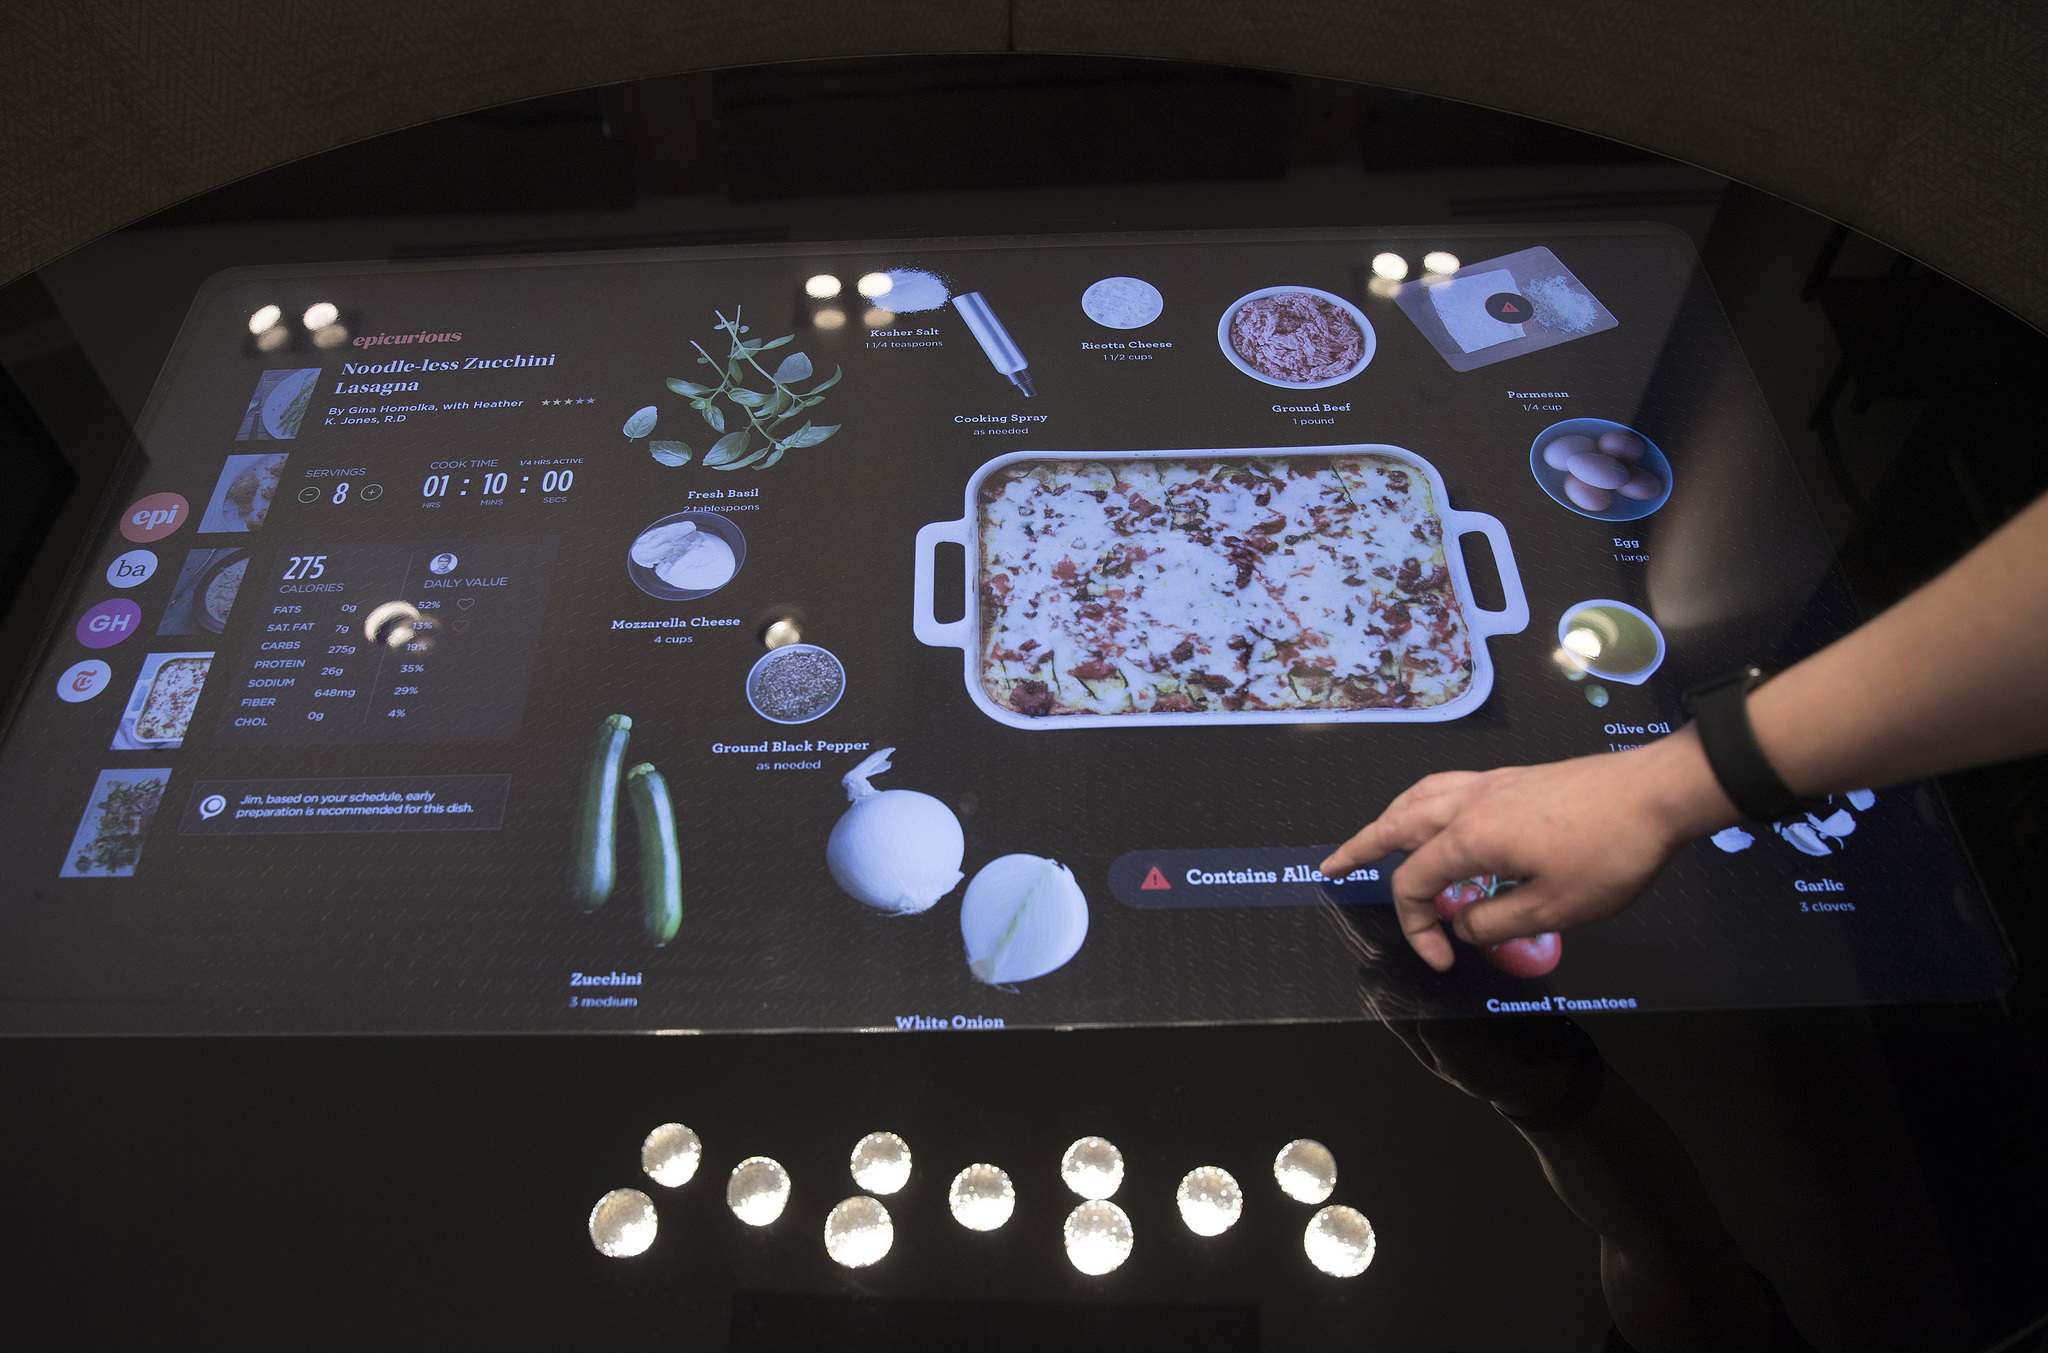 A touchscreen table optimized with Innit technology, which integrates other appliances to manage one's kitchen, is demonstrated at the new Pirch home design store in New York on May 20, 2016. (MUST CREDIT: Bloomberg photo by Victor J. Blue)